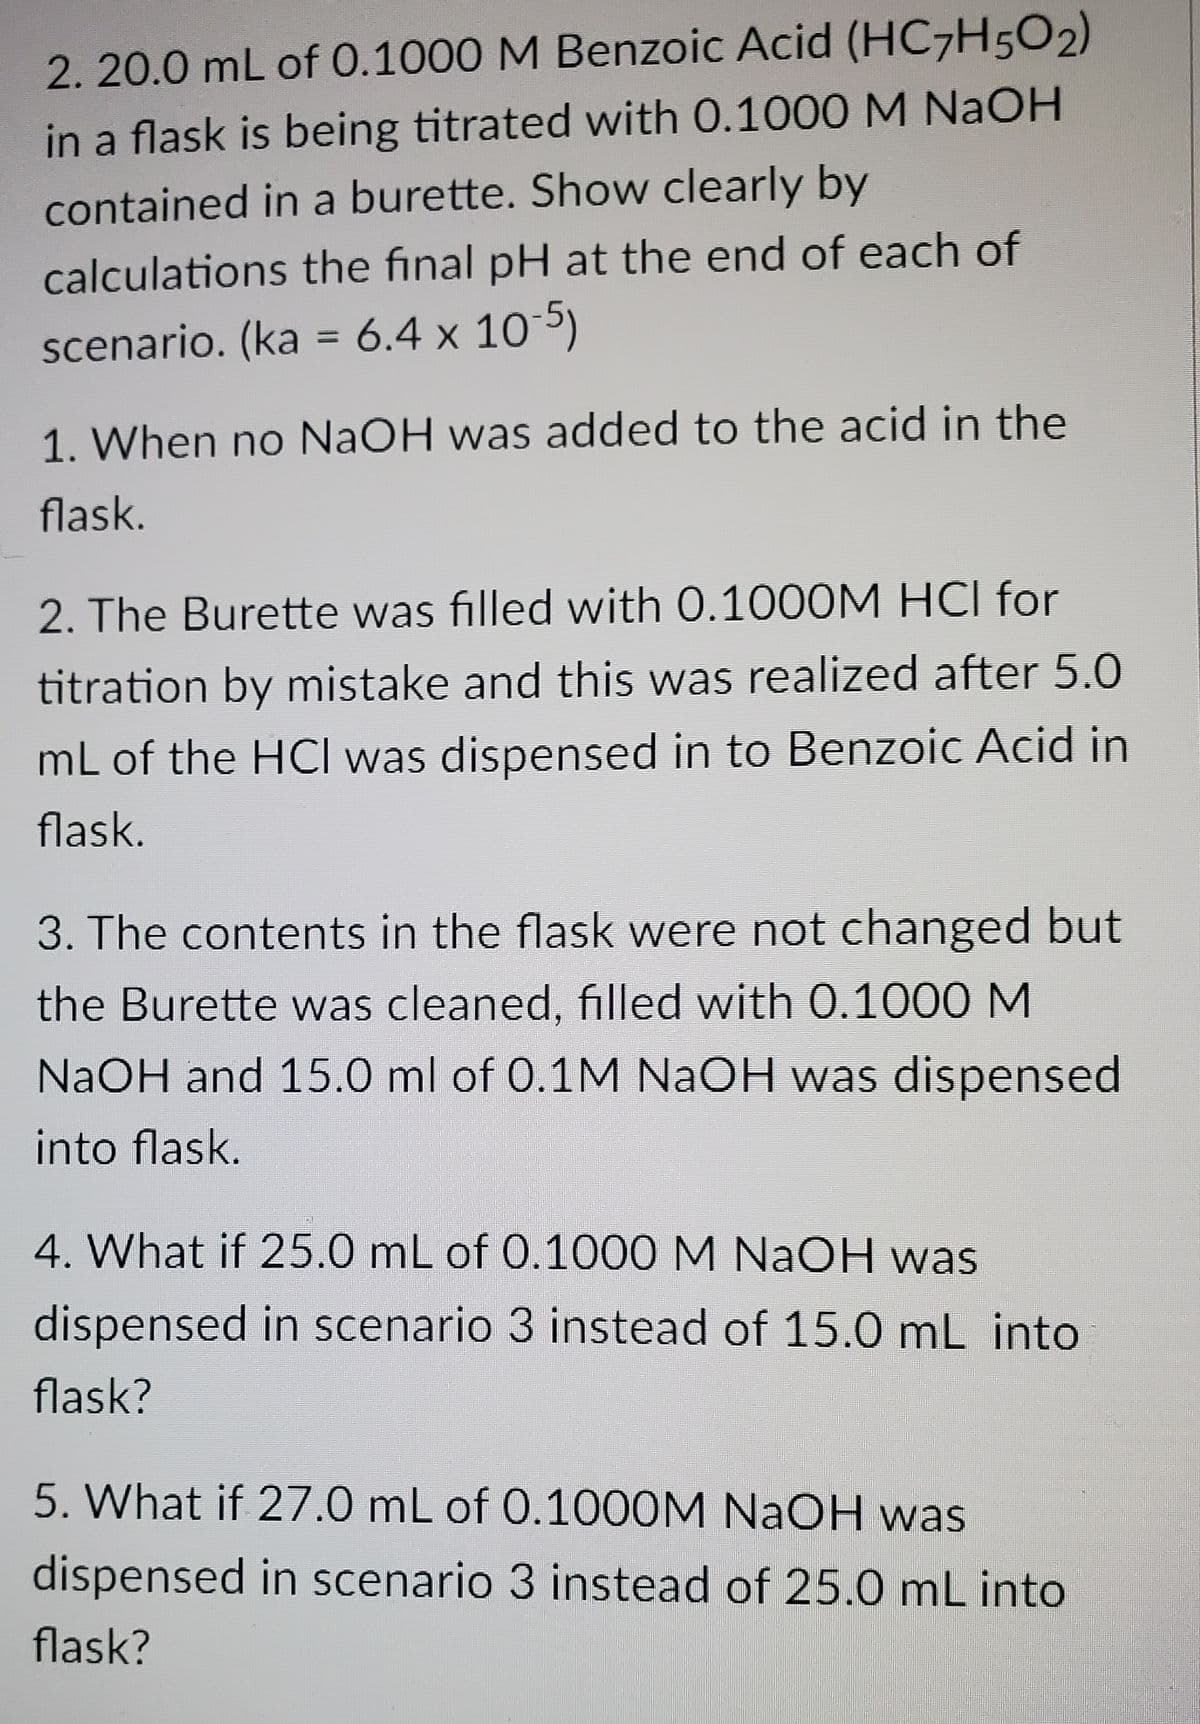 2. 20.0 mL of 0.1000 M Benzoic Acid (HC7H5O2)
in a flask is being titrated with 0.1000 M NaOH
contained in a burette. Show clearly by
calculations the final pH at the end of each of
scenario. (ka = 6.4 x 10 5)
1. When no NaOH was added to the acid in the
flask.
2. The Burette was filled with 0.1000M HCI for
titration by mistake and this was realized after 5.0
mL of the HCI was dispensed in to Benzoic Acid in
flask.
3. The contents in the flask were not changed but
the Burette was cleaned, filled with 0.1000 M
NaOH and 15.0 ml of 0.1M NaOH was dispensed
into flask.
4. What if 25.0 mL of 0.1000 M NAOH was
dispensed in scenario 3 instead of 15.0 mL into
flask?
5. What if 27.0 mL of 0.1000M NaOH was
dispensed in scenario 3 instead of 25.0 mL into
flask?
